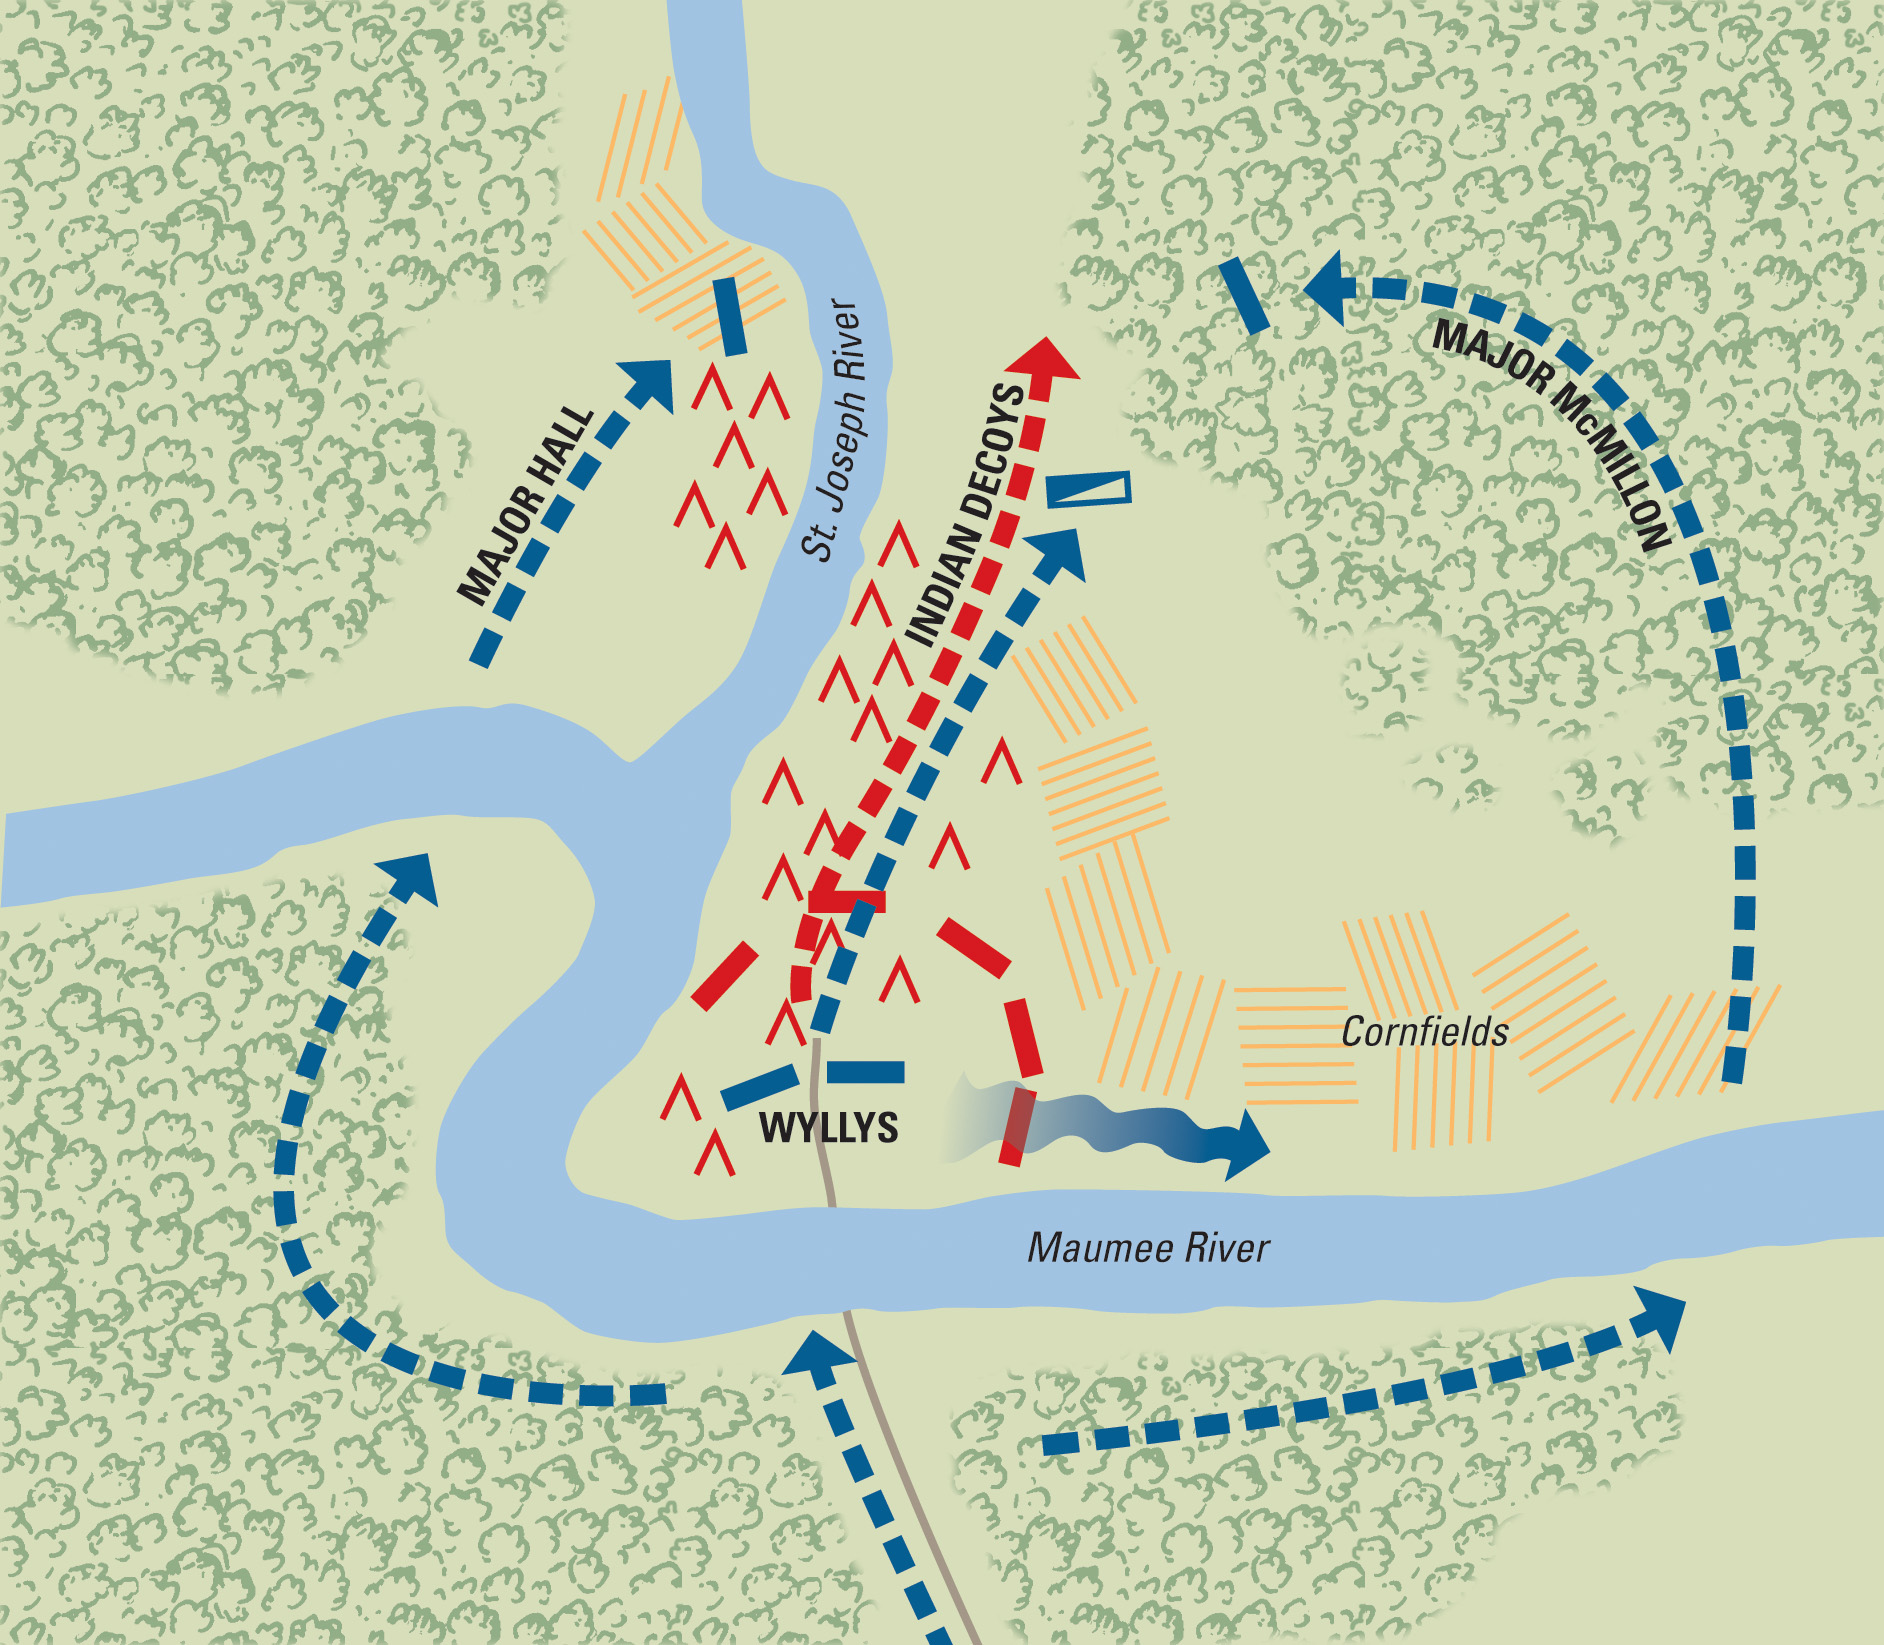 In the main battle of the first expedition, Majors Hall and McMillon encircled the village while Wyllys attacked straight on.